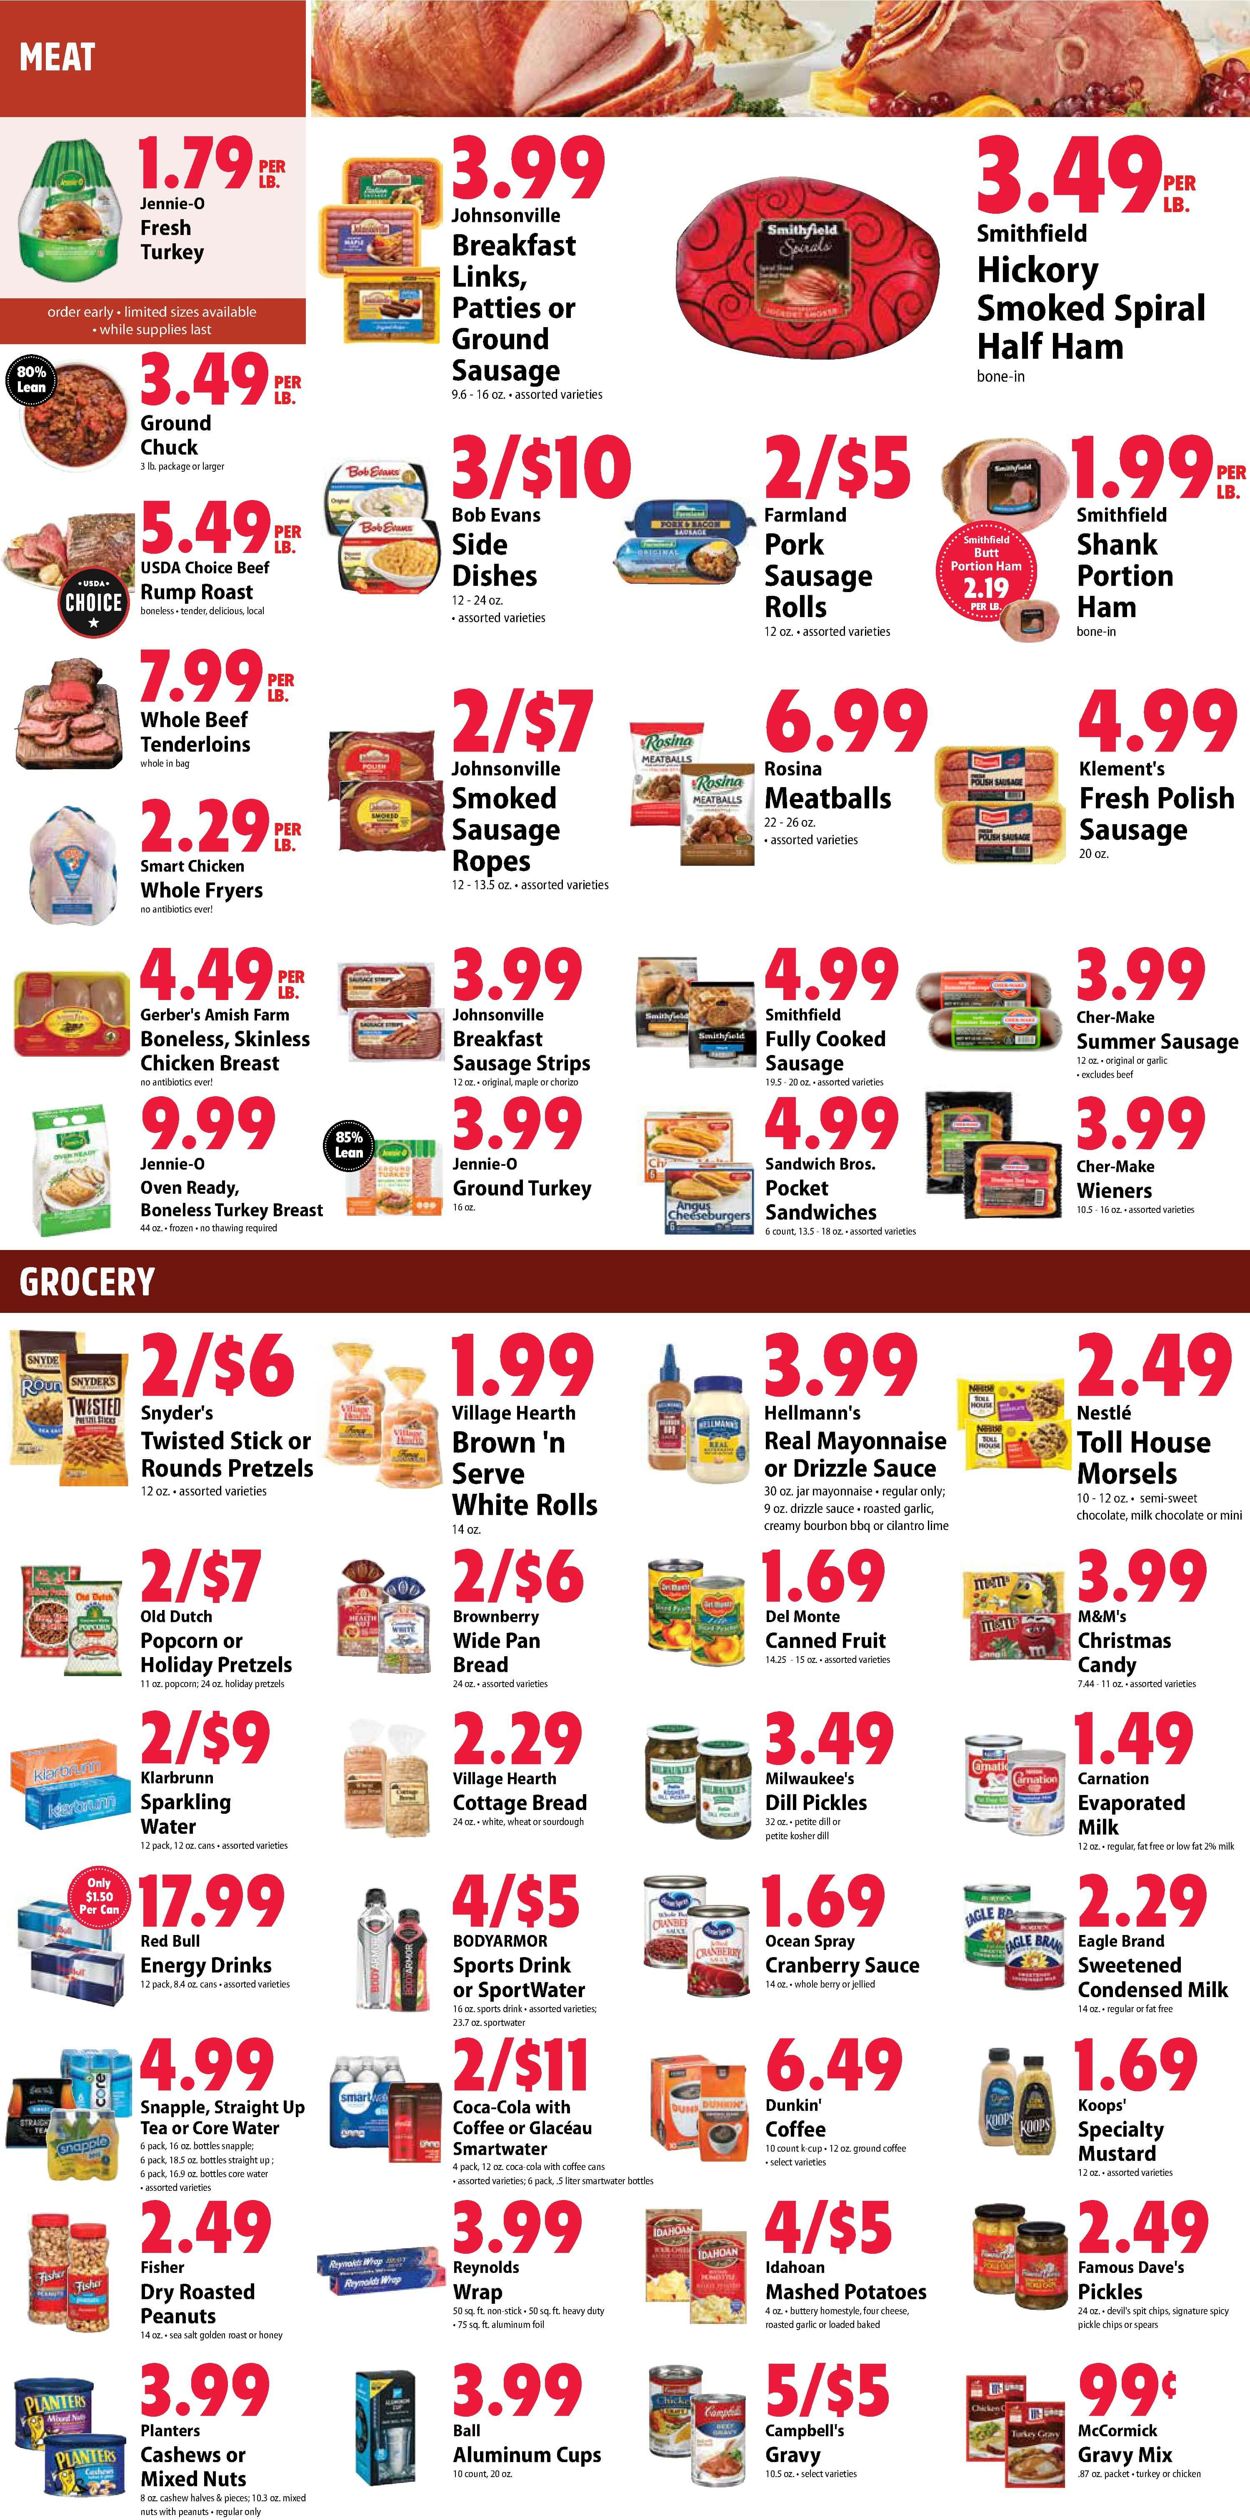 Festival Foods HOLIDAY 2021 Weekly Ad Circular - valid 11/17-11/23/2021 (Page 2)